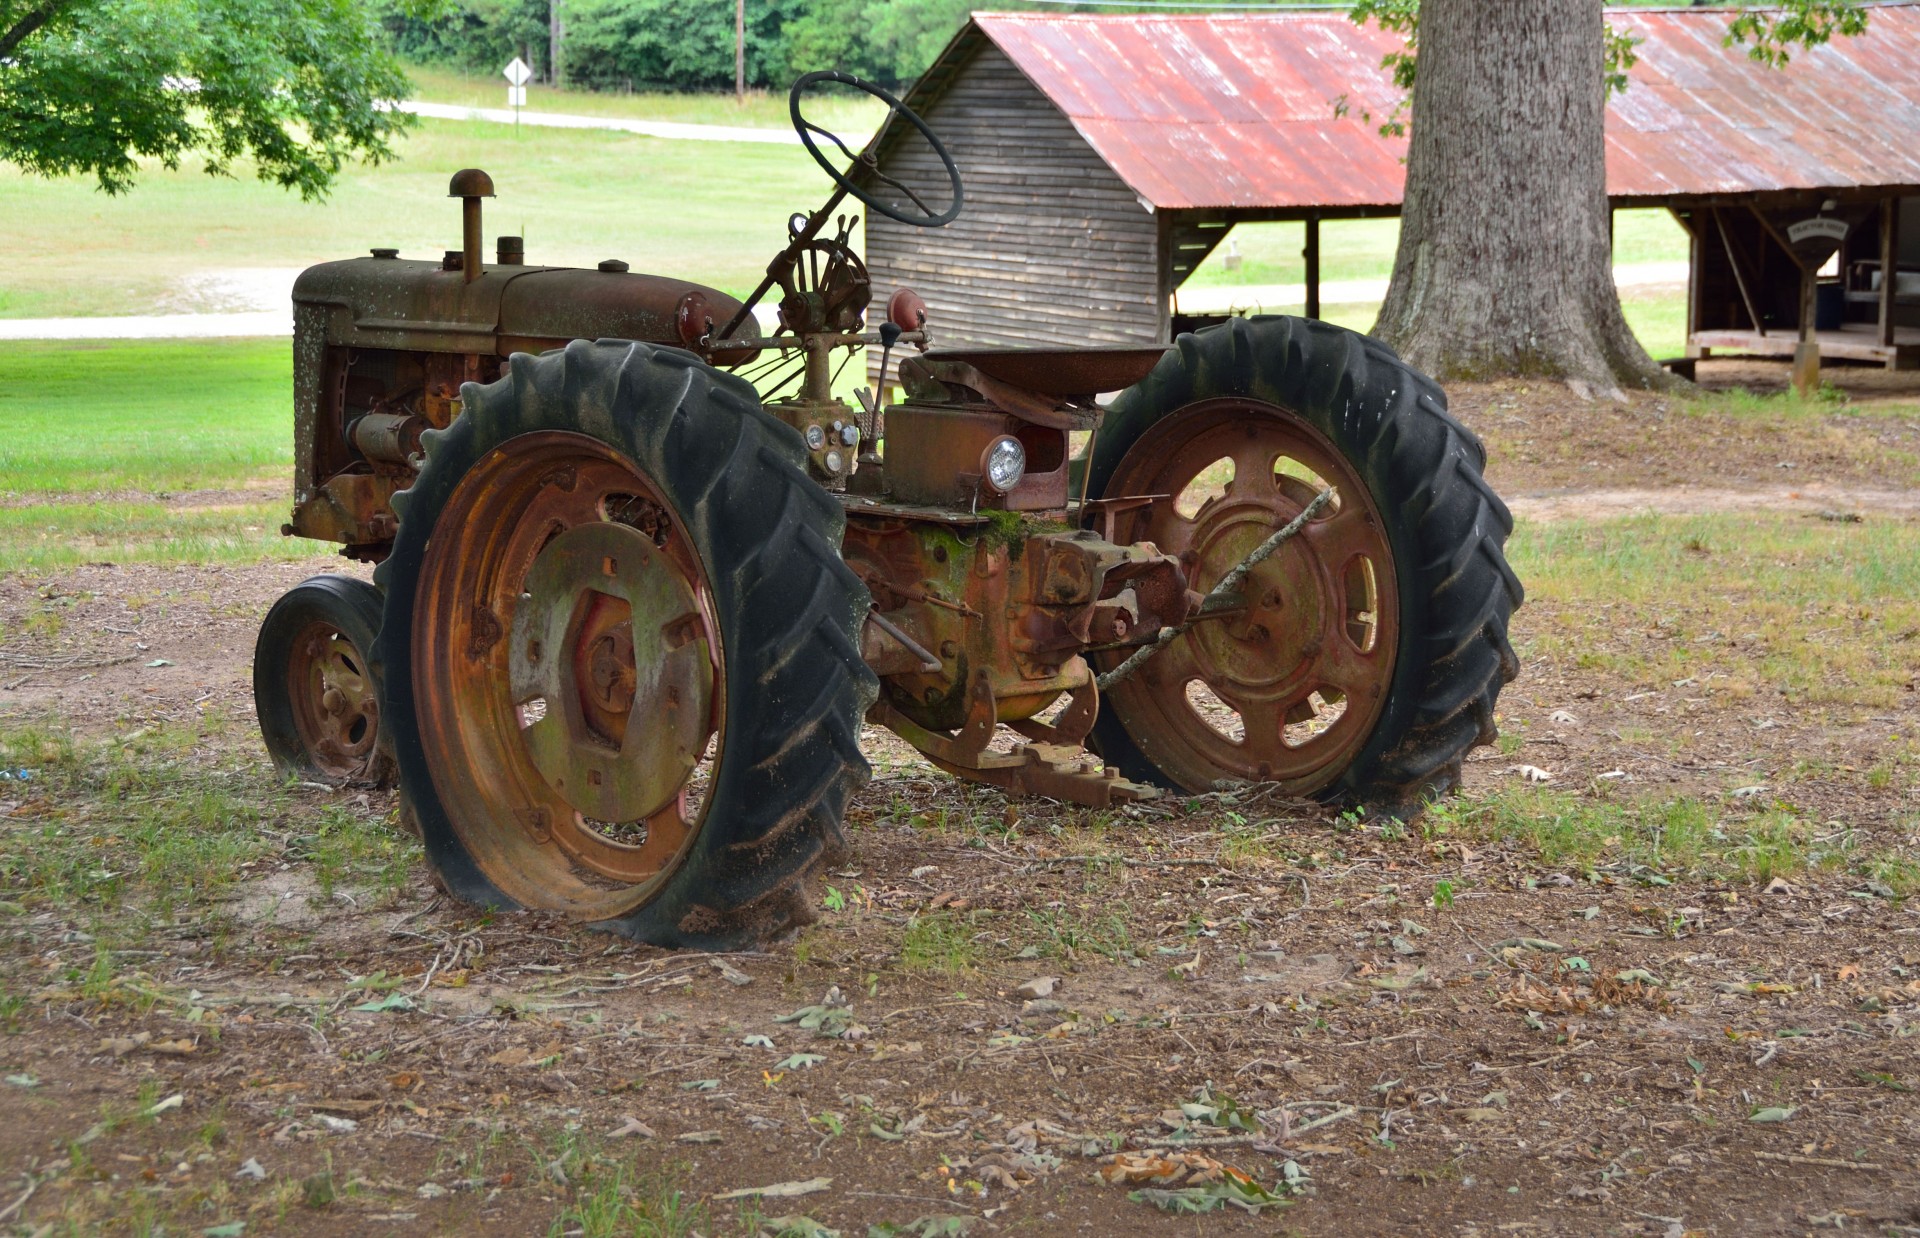 Rusty old tractor at rural Georgia, USA